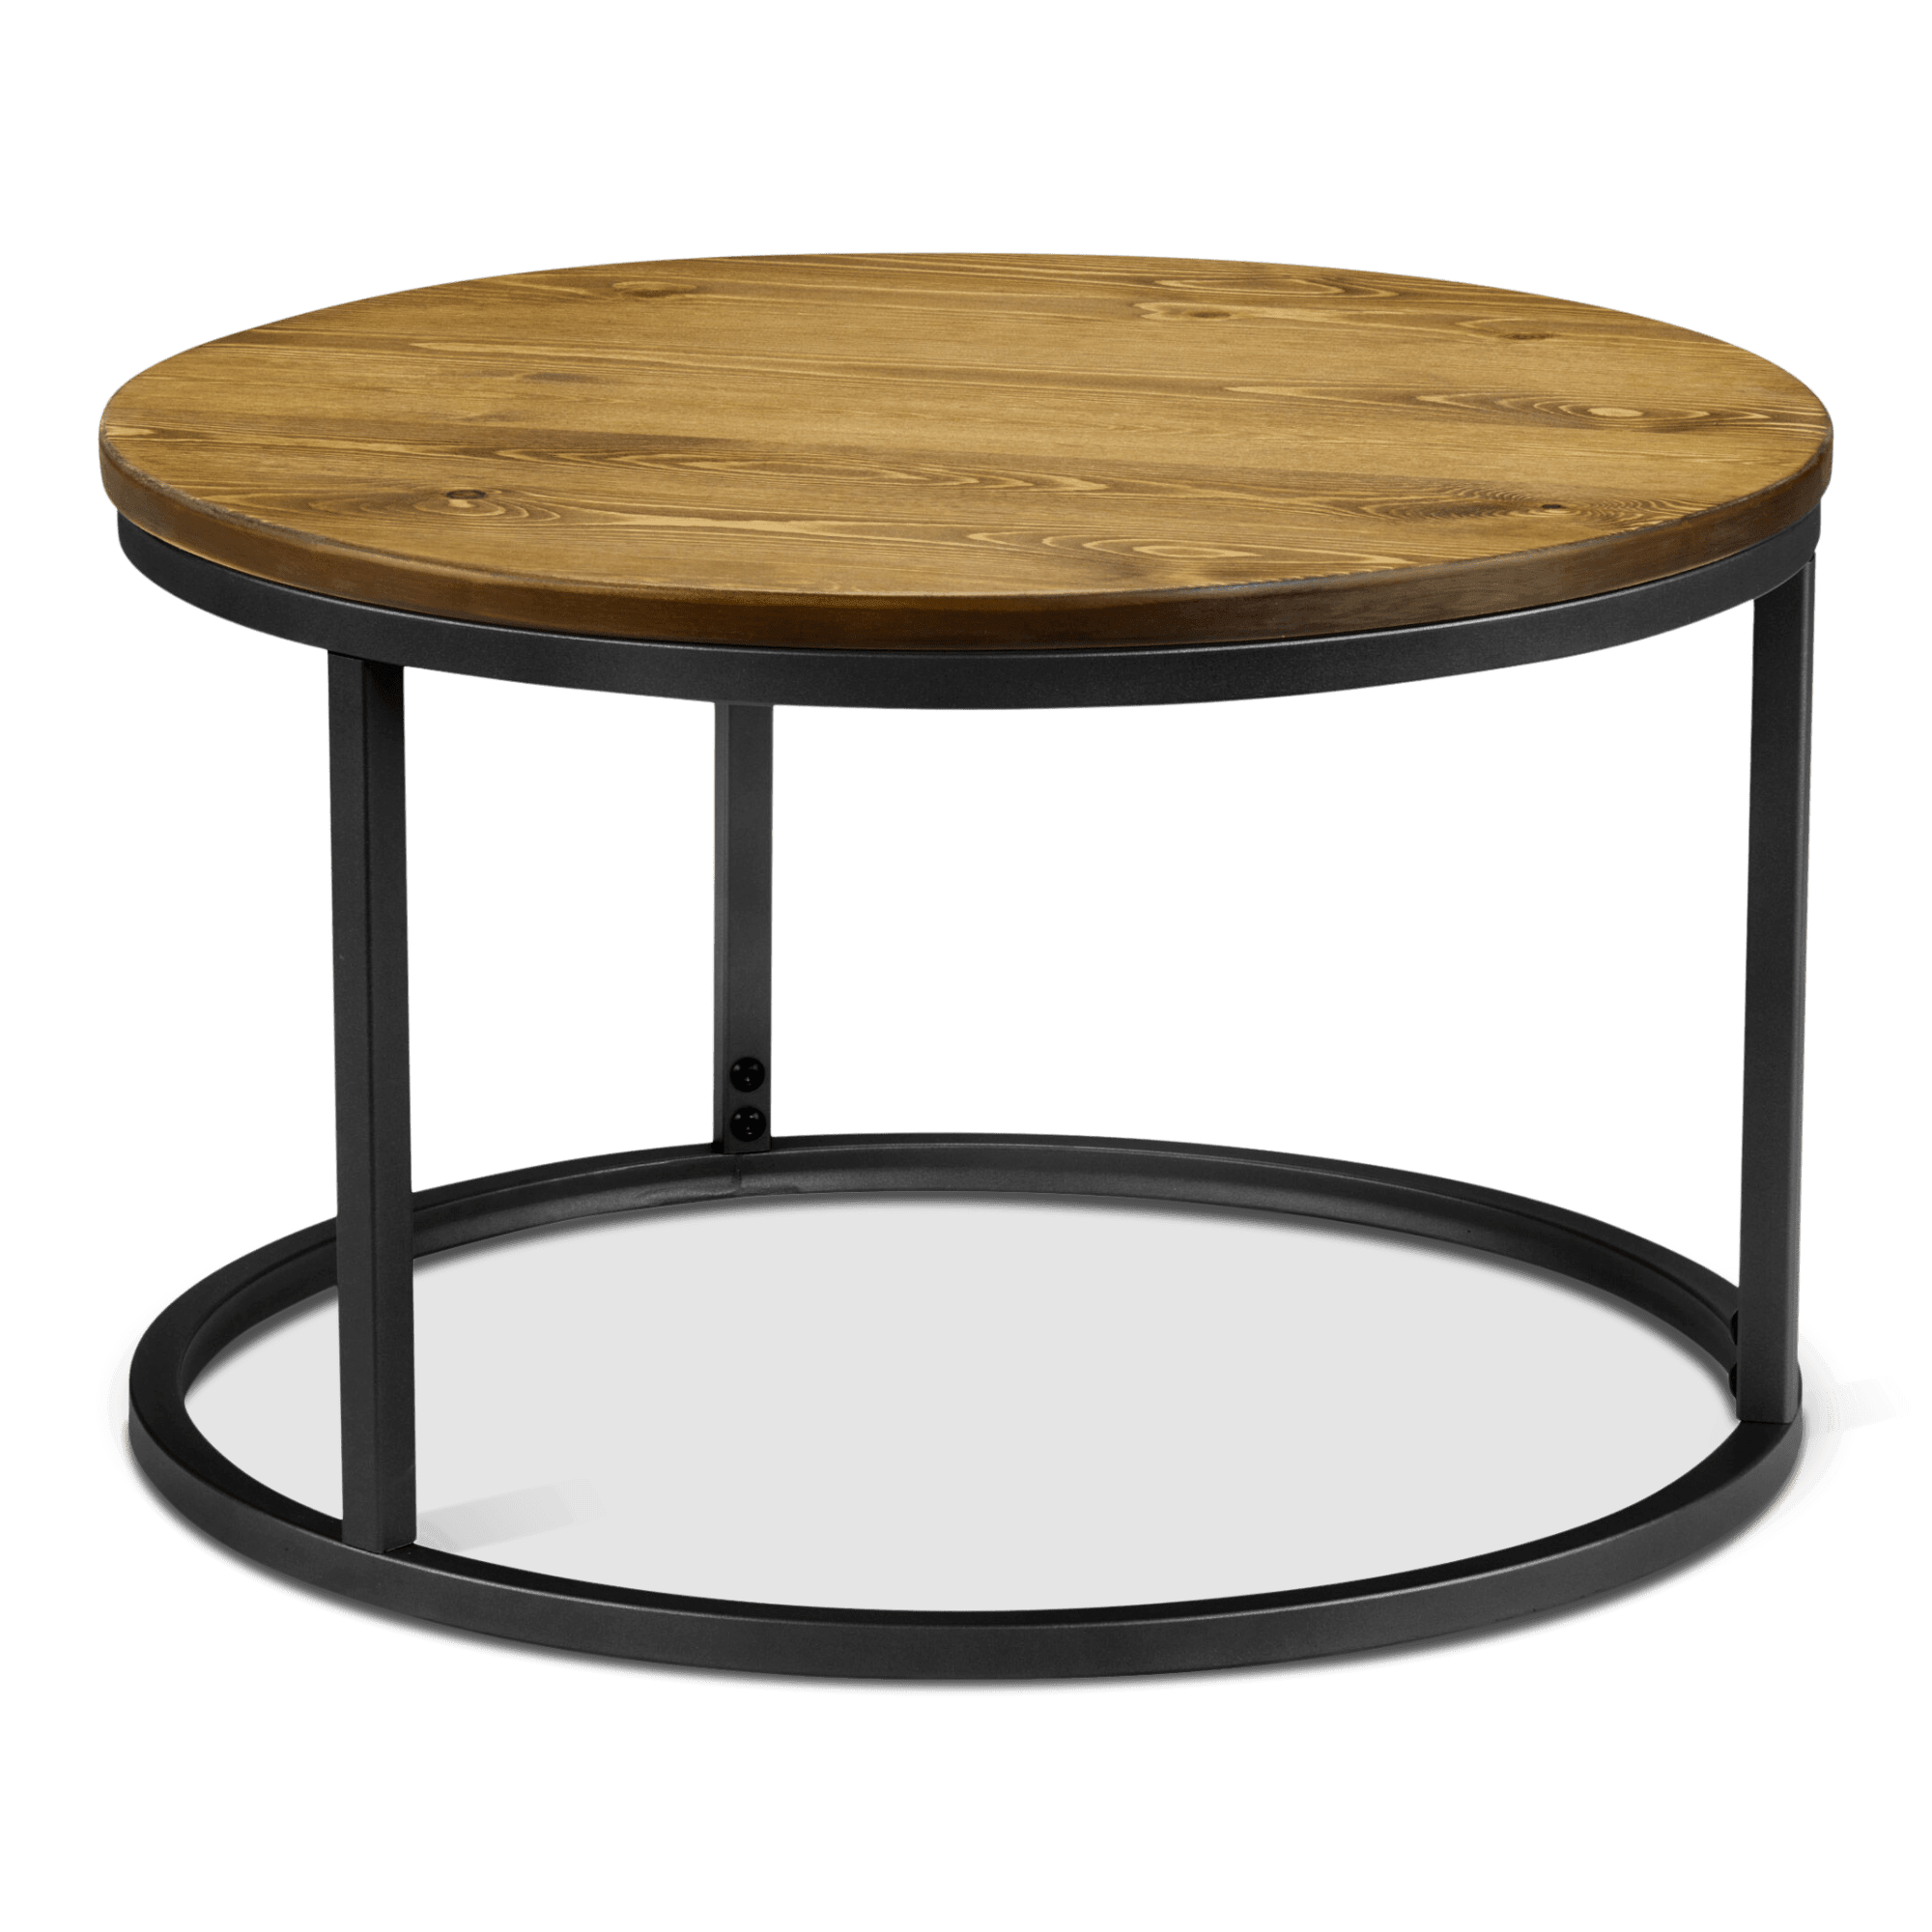 Set of 2 Pine Wood Coffee Tables with Metal Legs